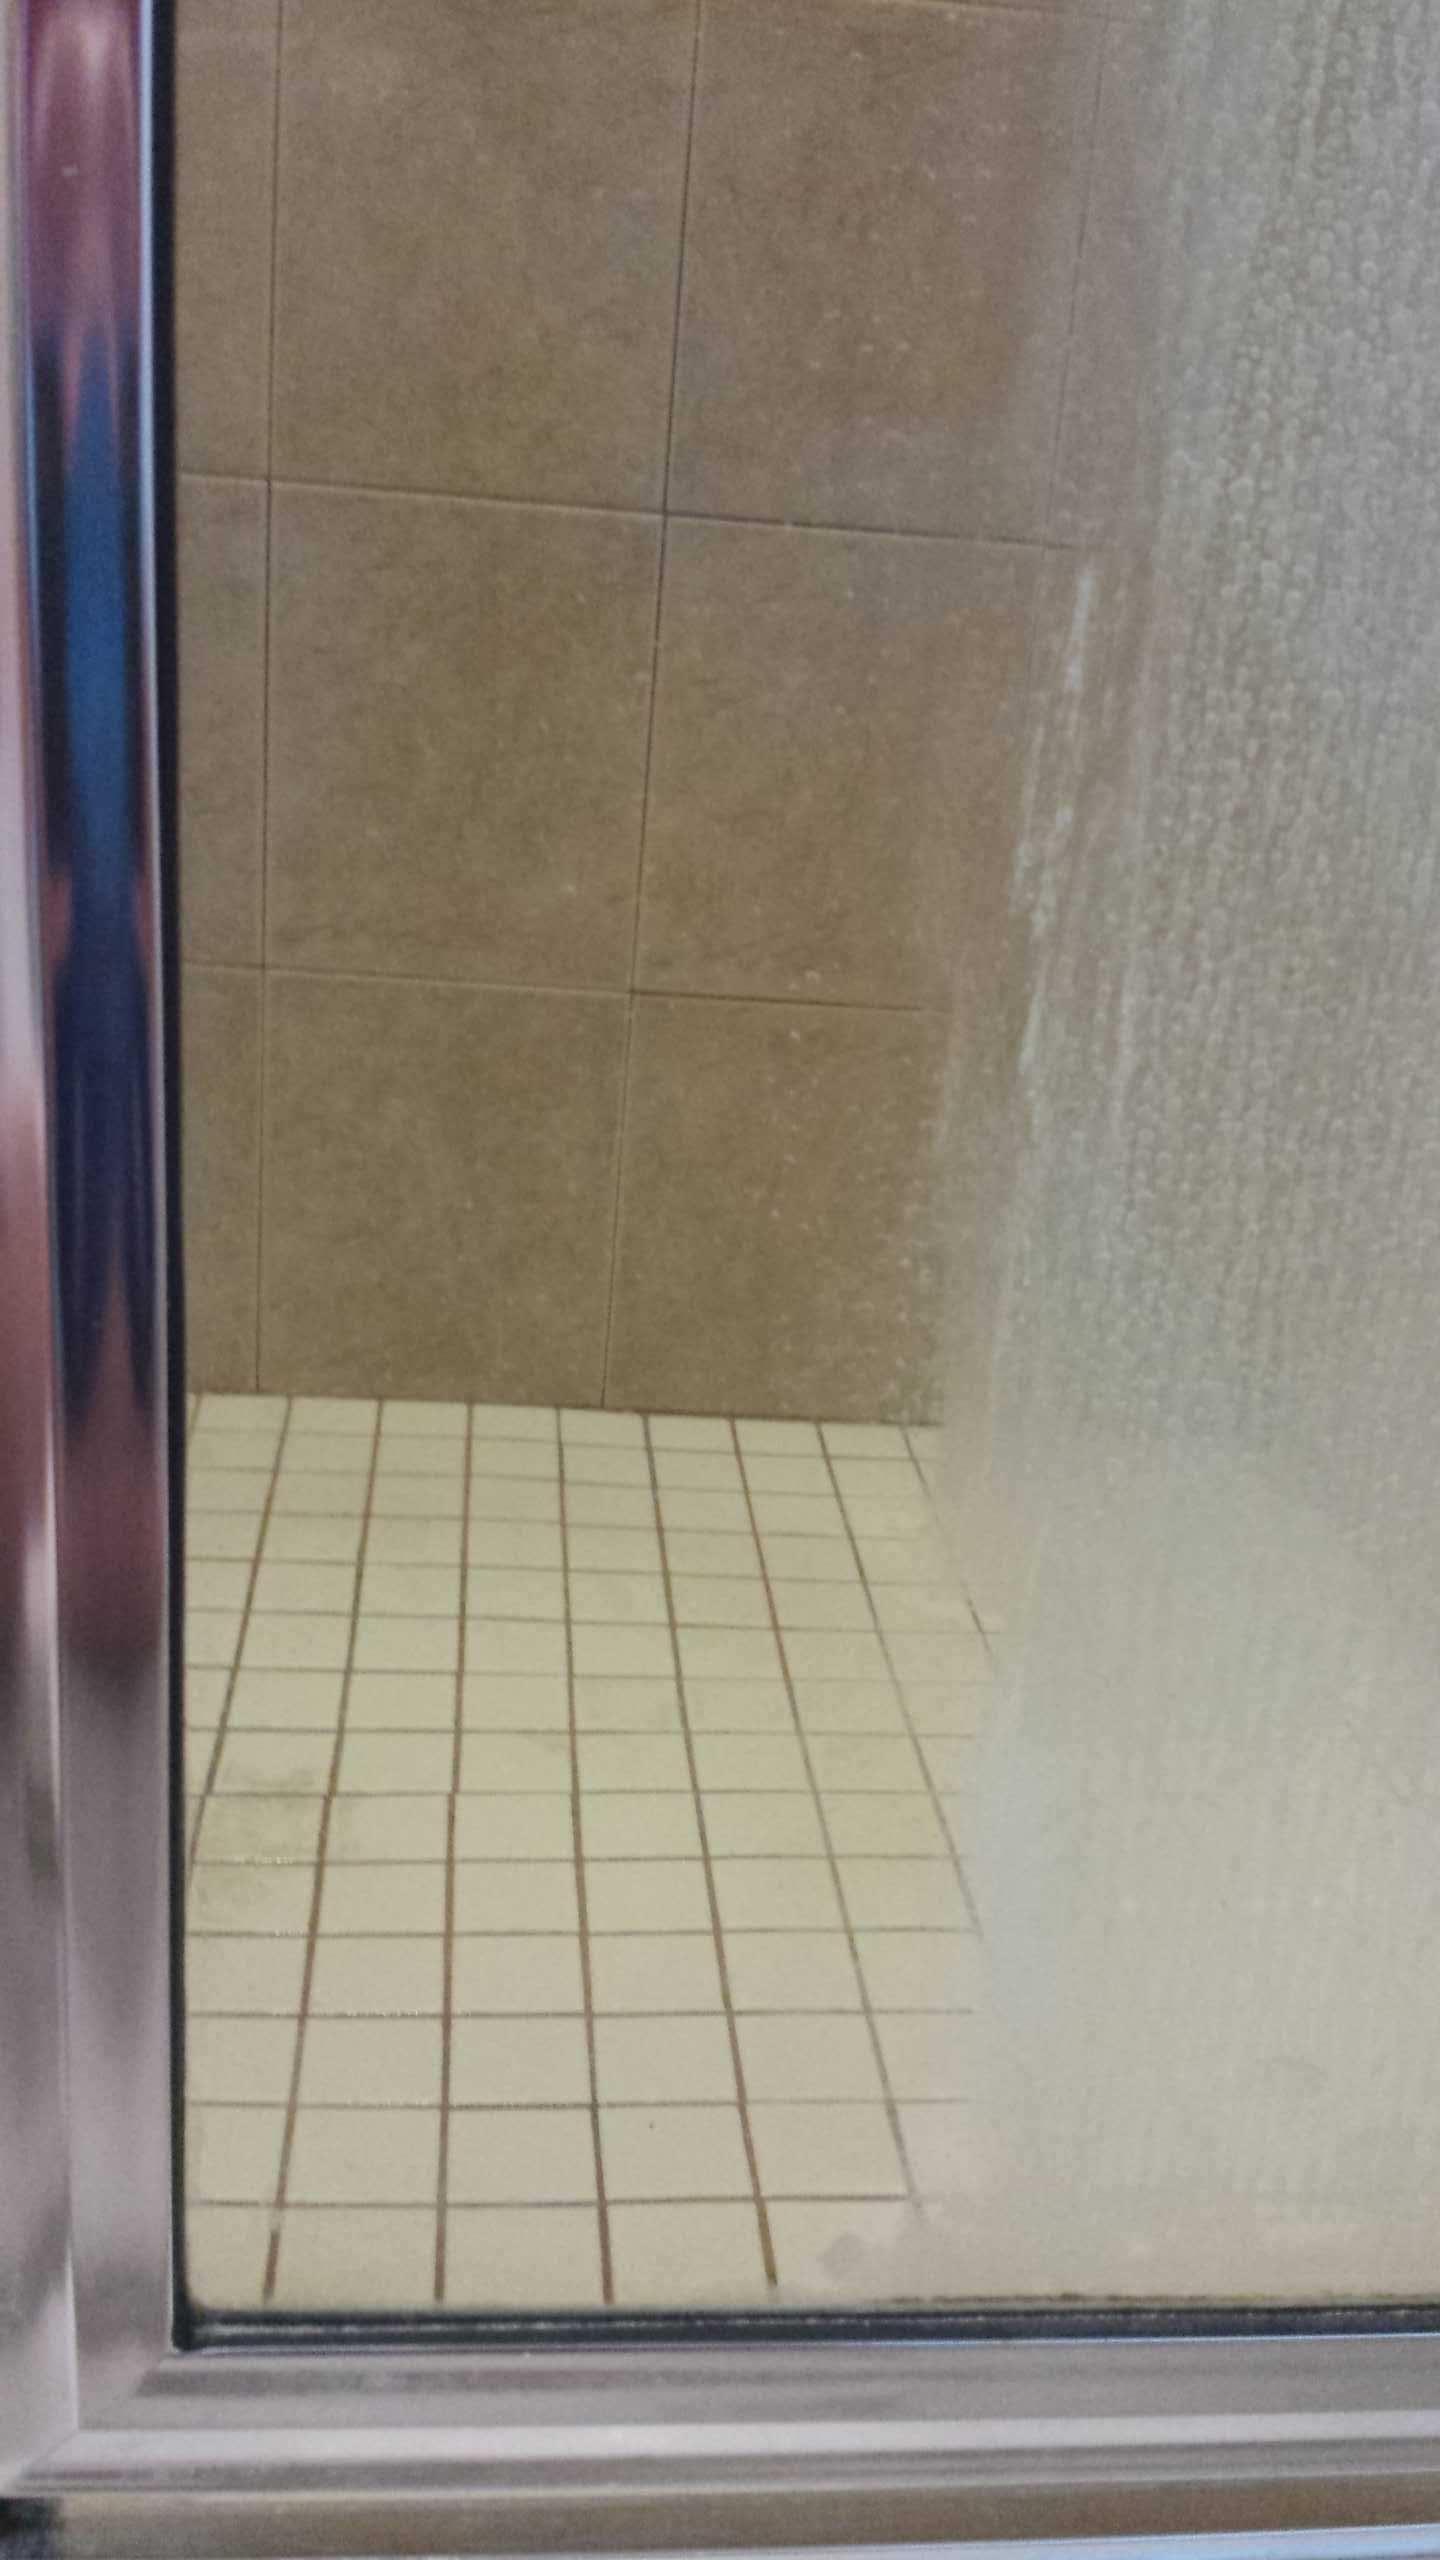 MARBLELIFE SOAP AND SCUM REMOVER EXAMPLE ON GLASS SHOWER DOOR